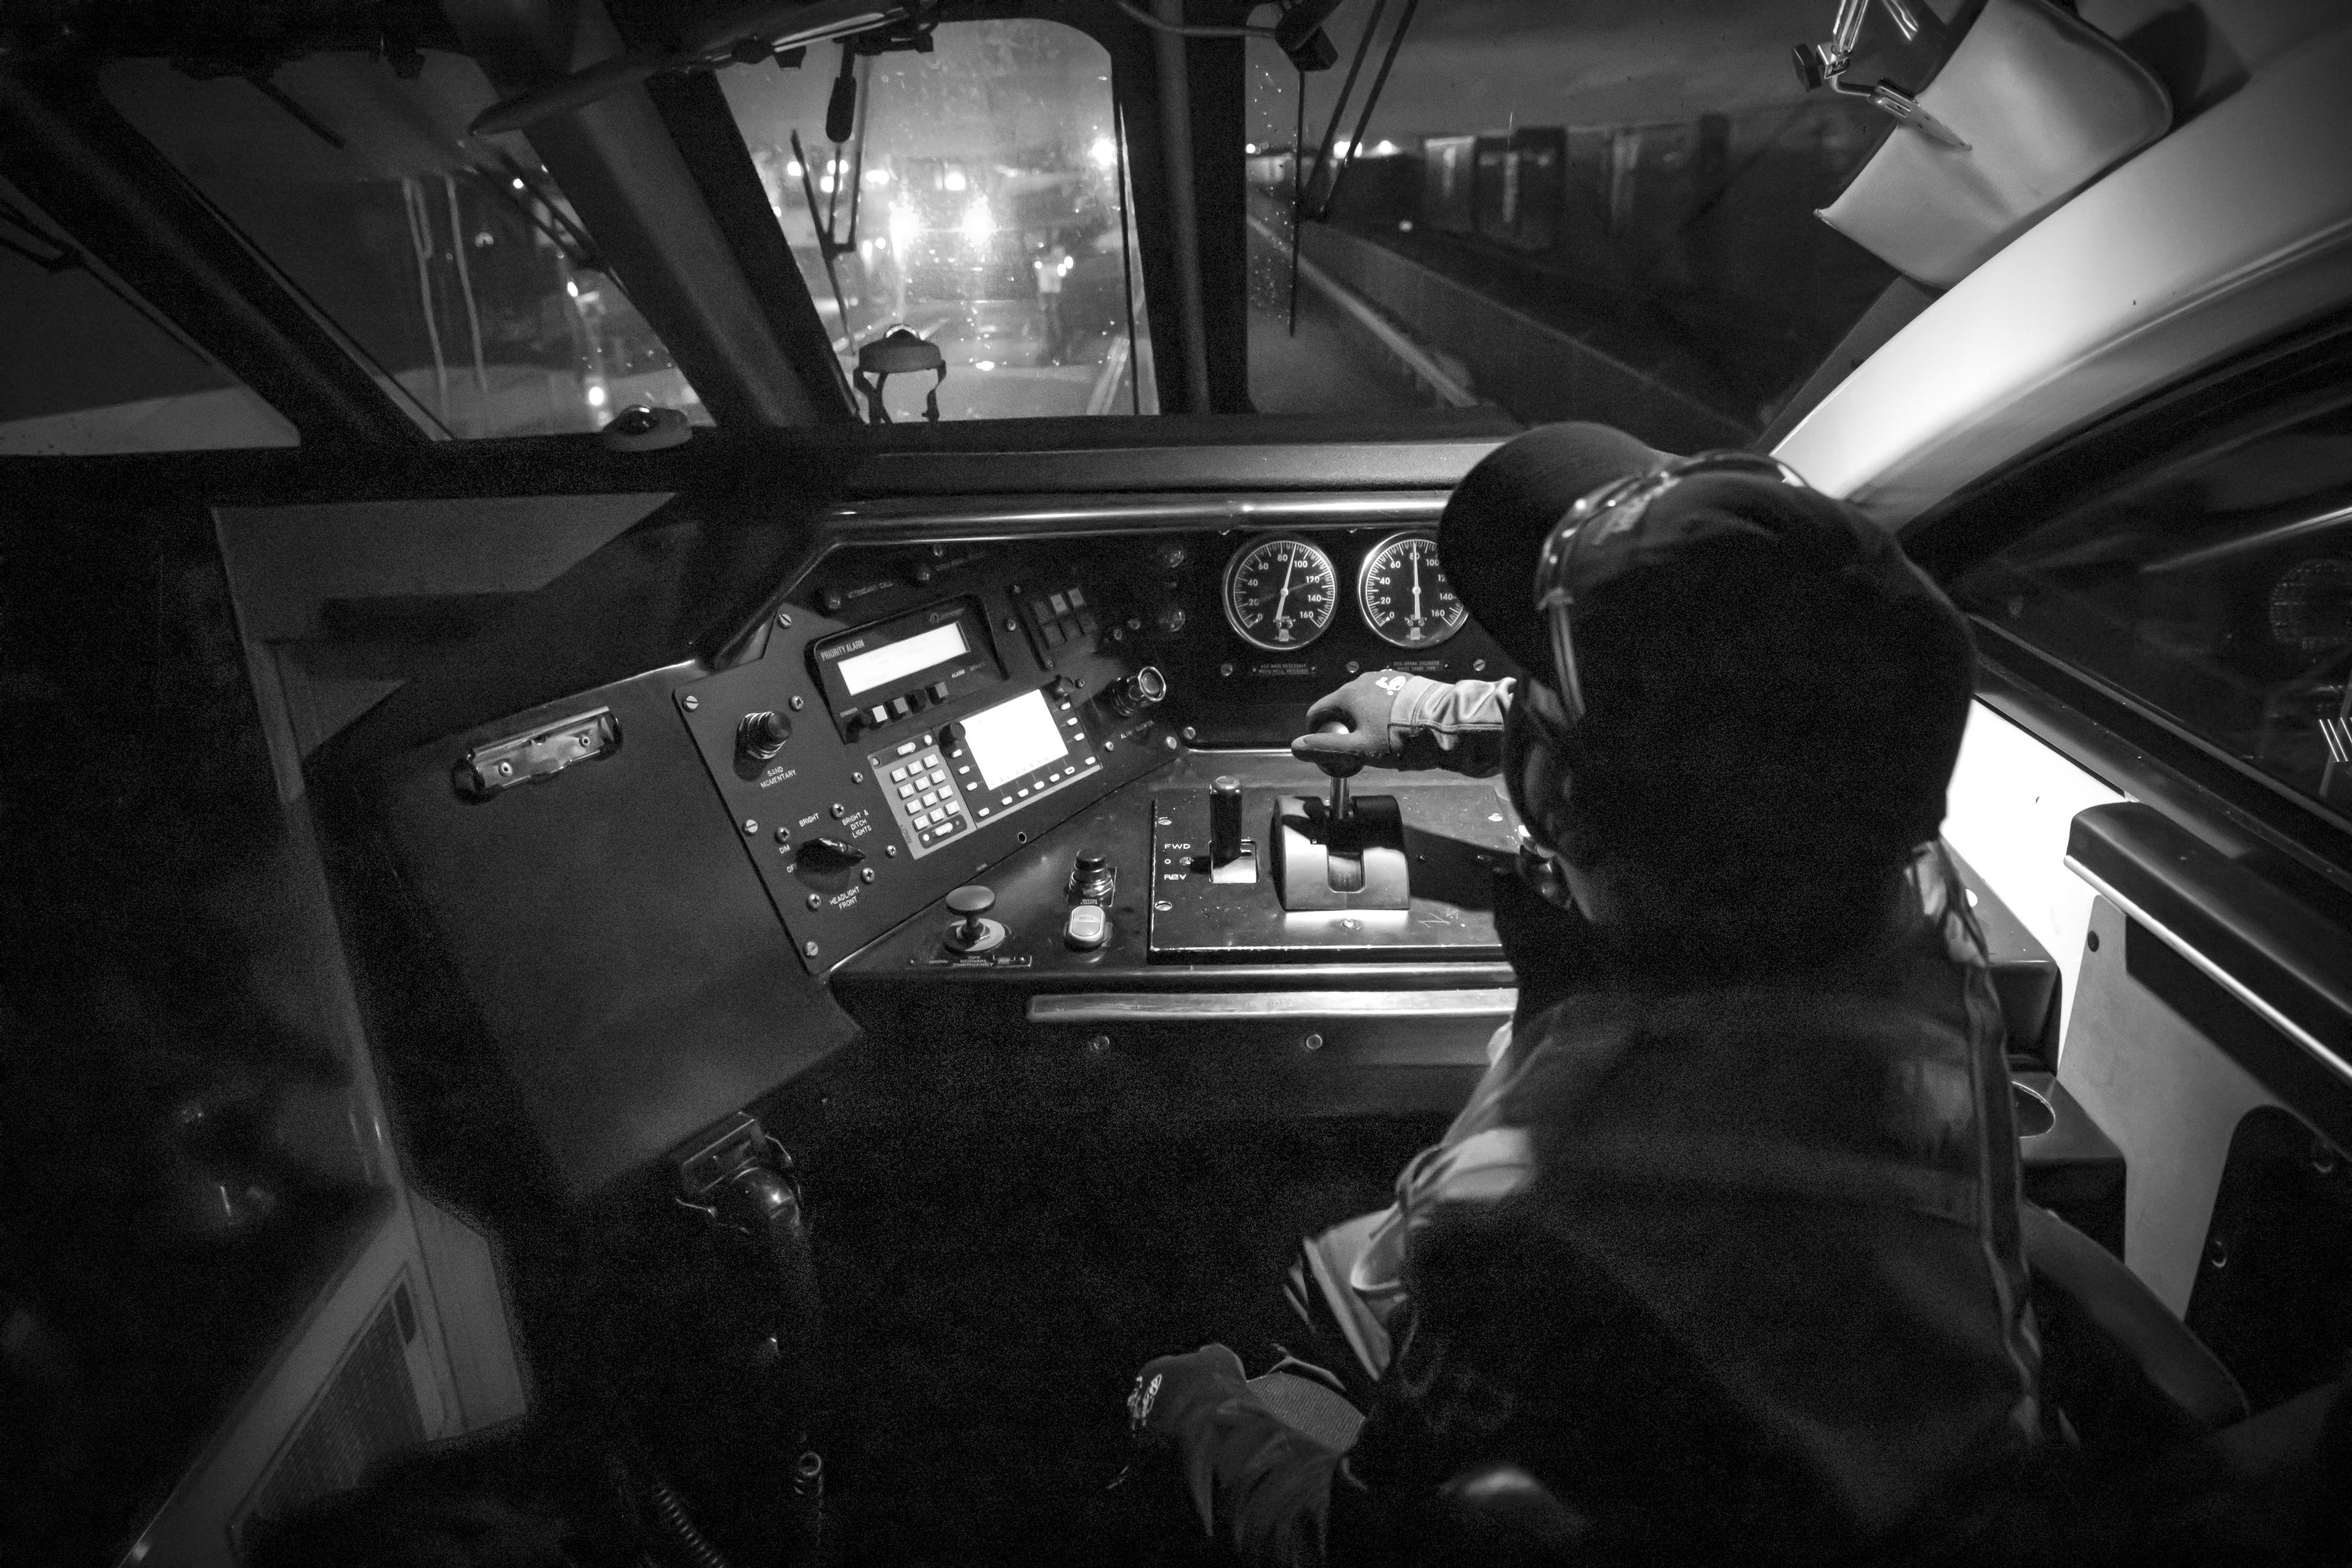 A man sits at the controls of a GO train.